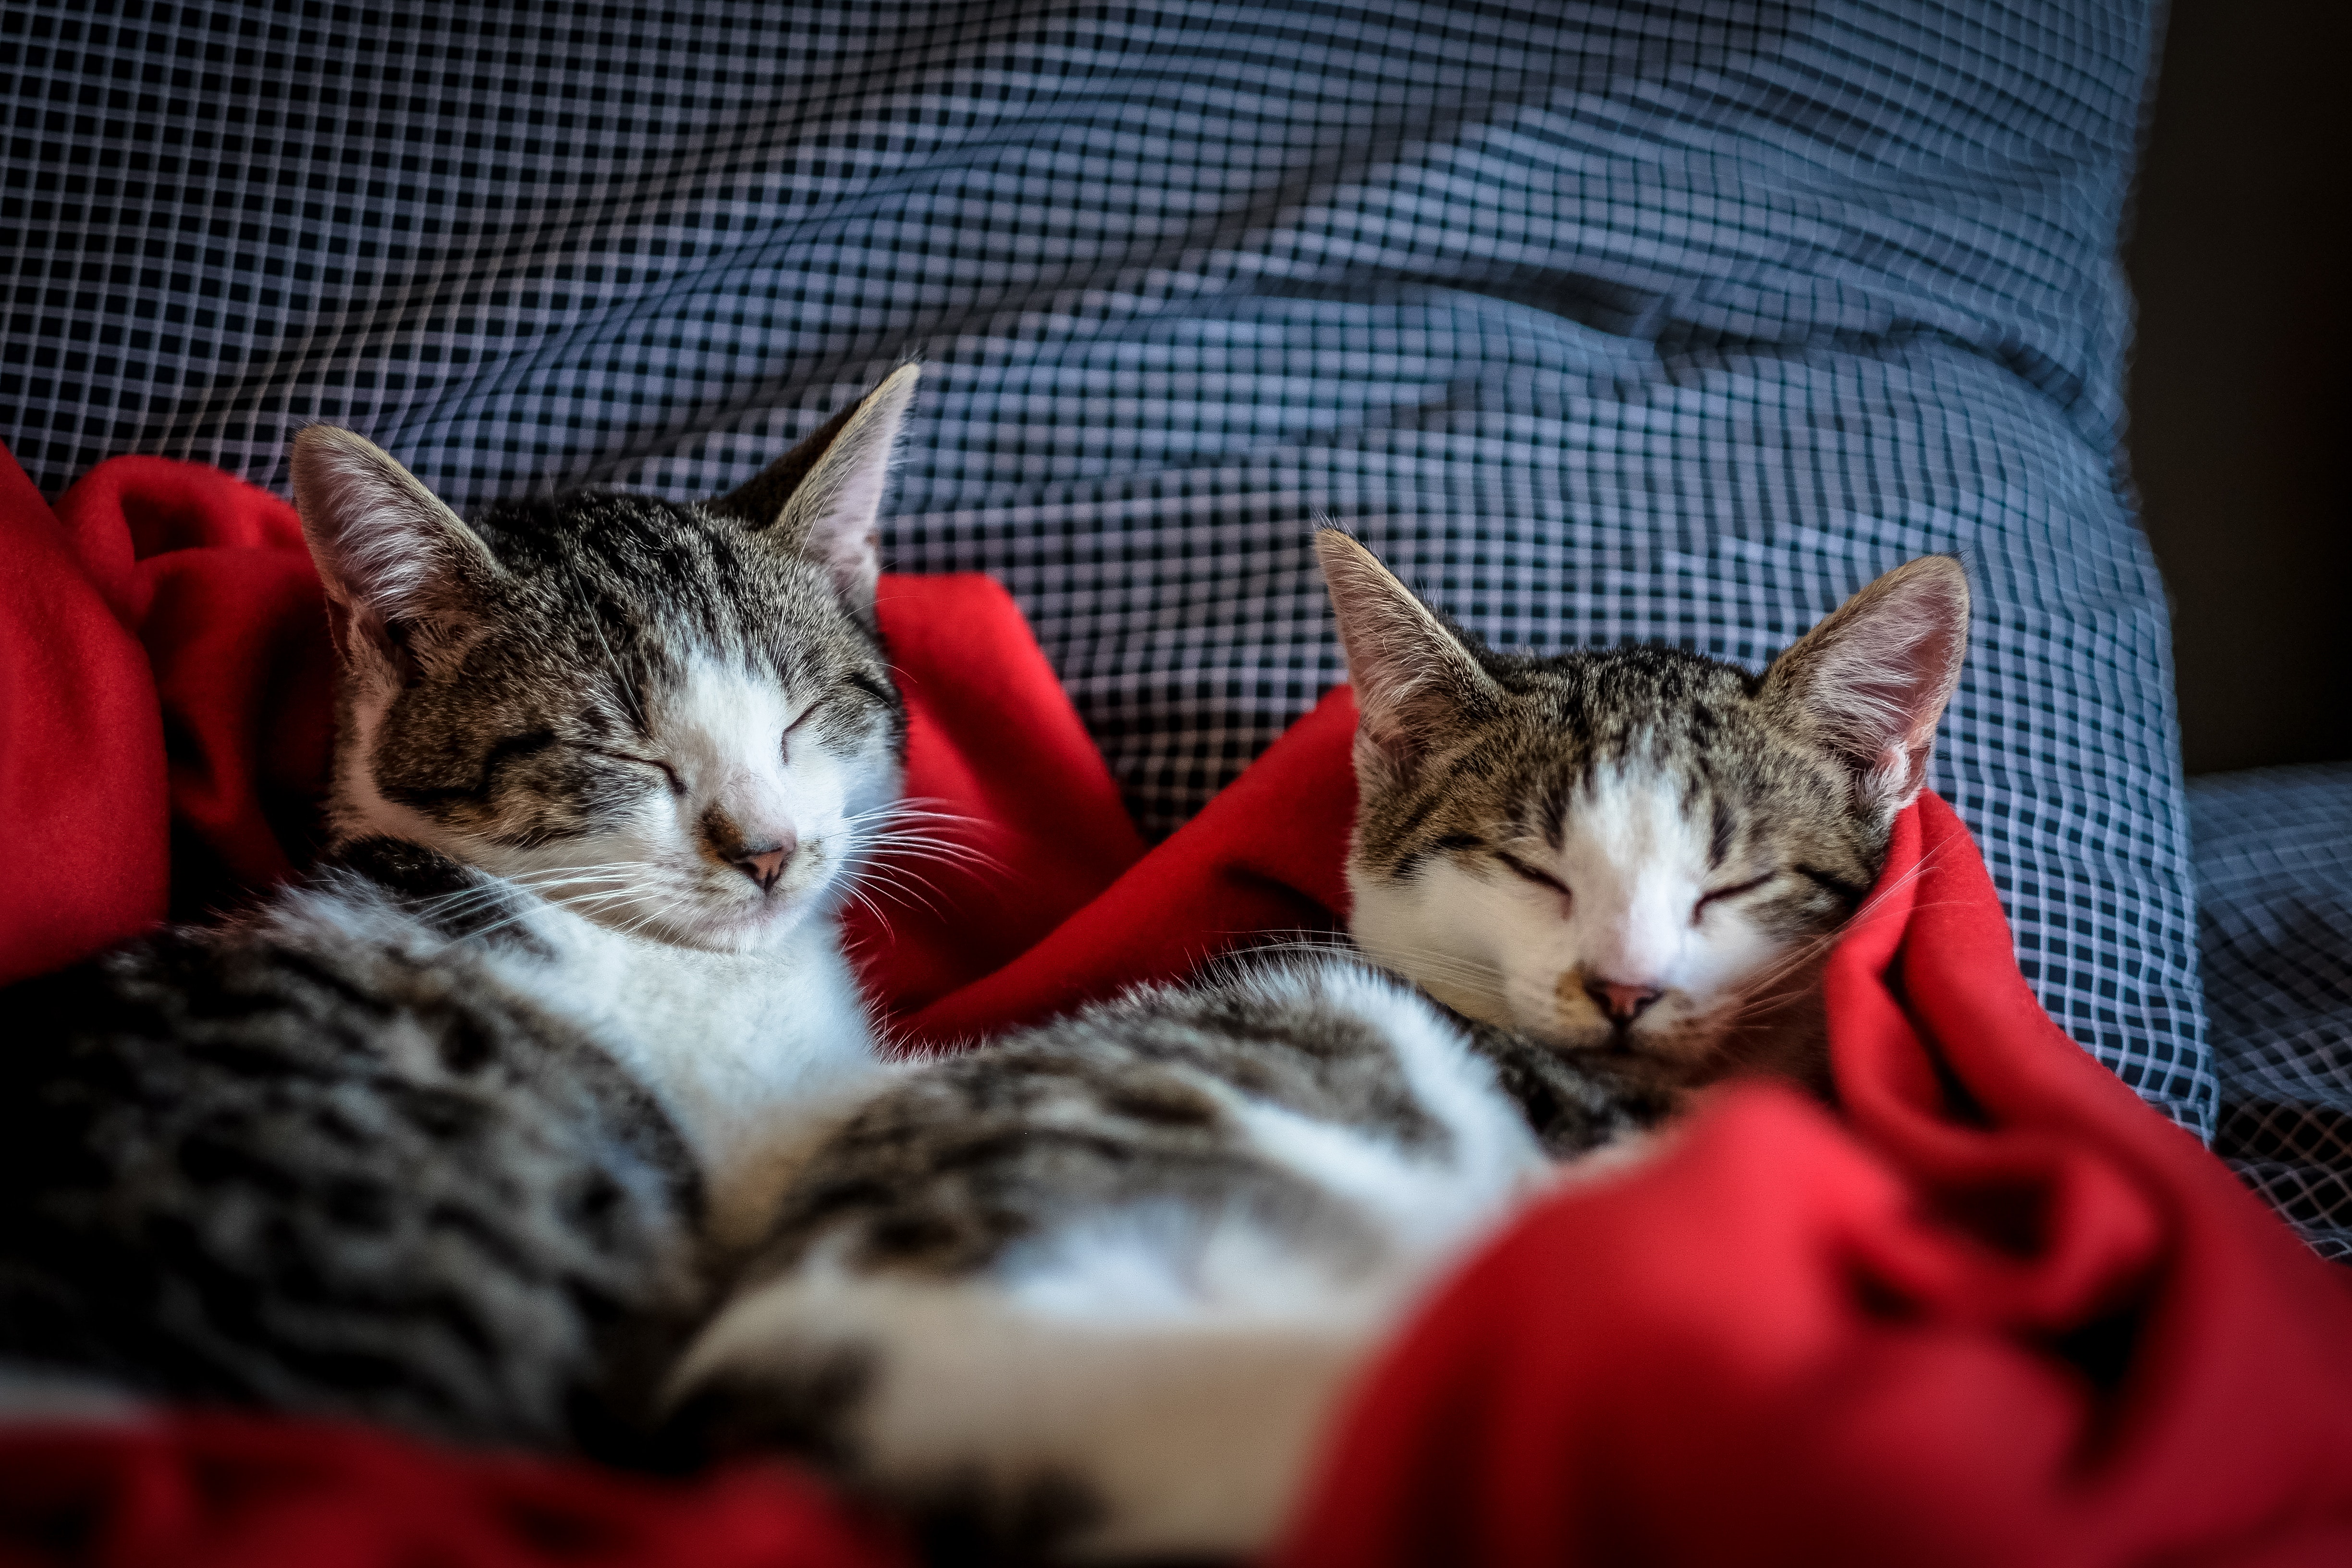 Two Cats Sleeping